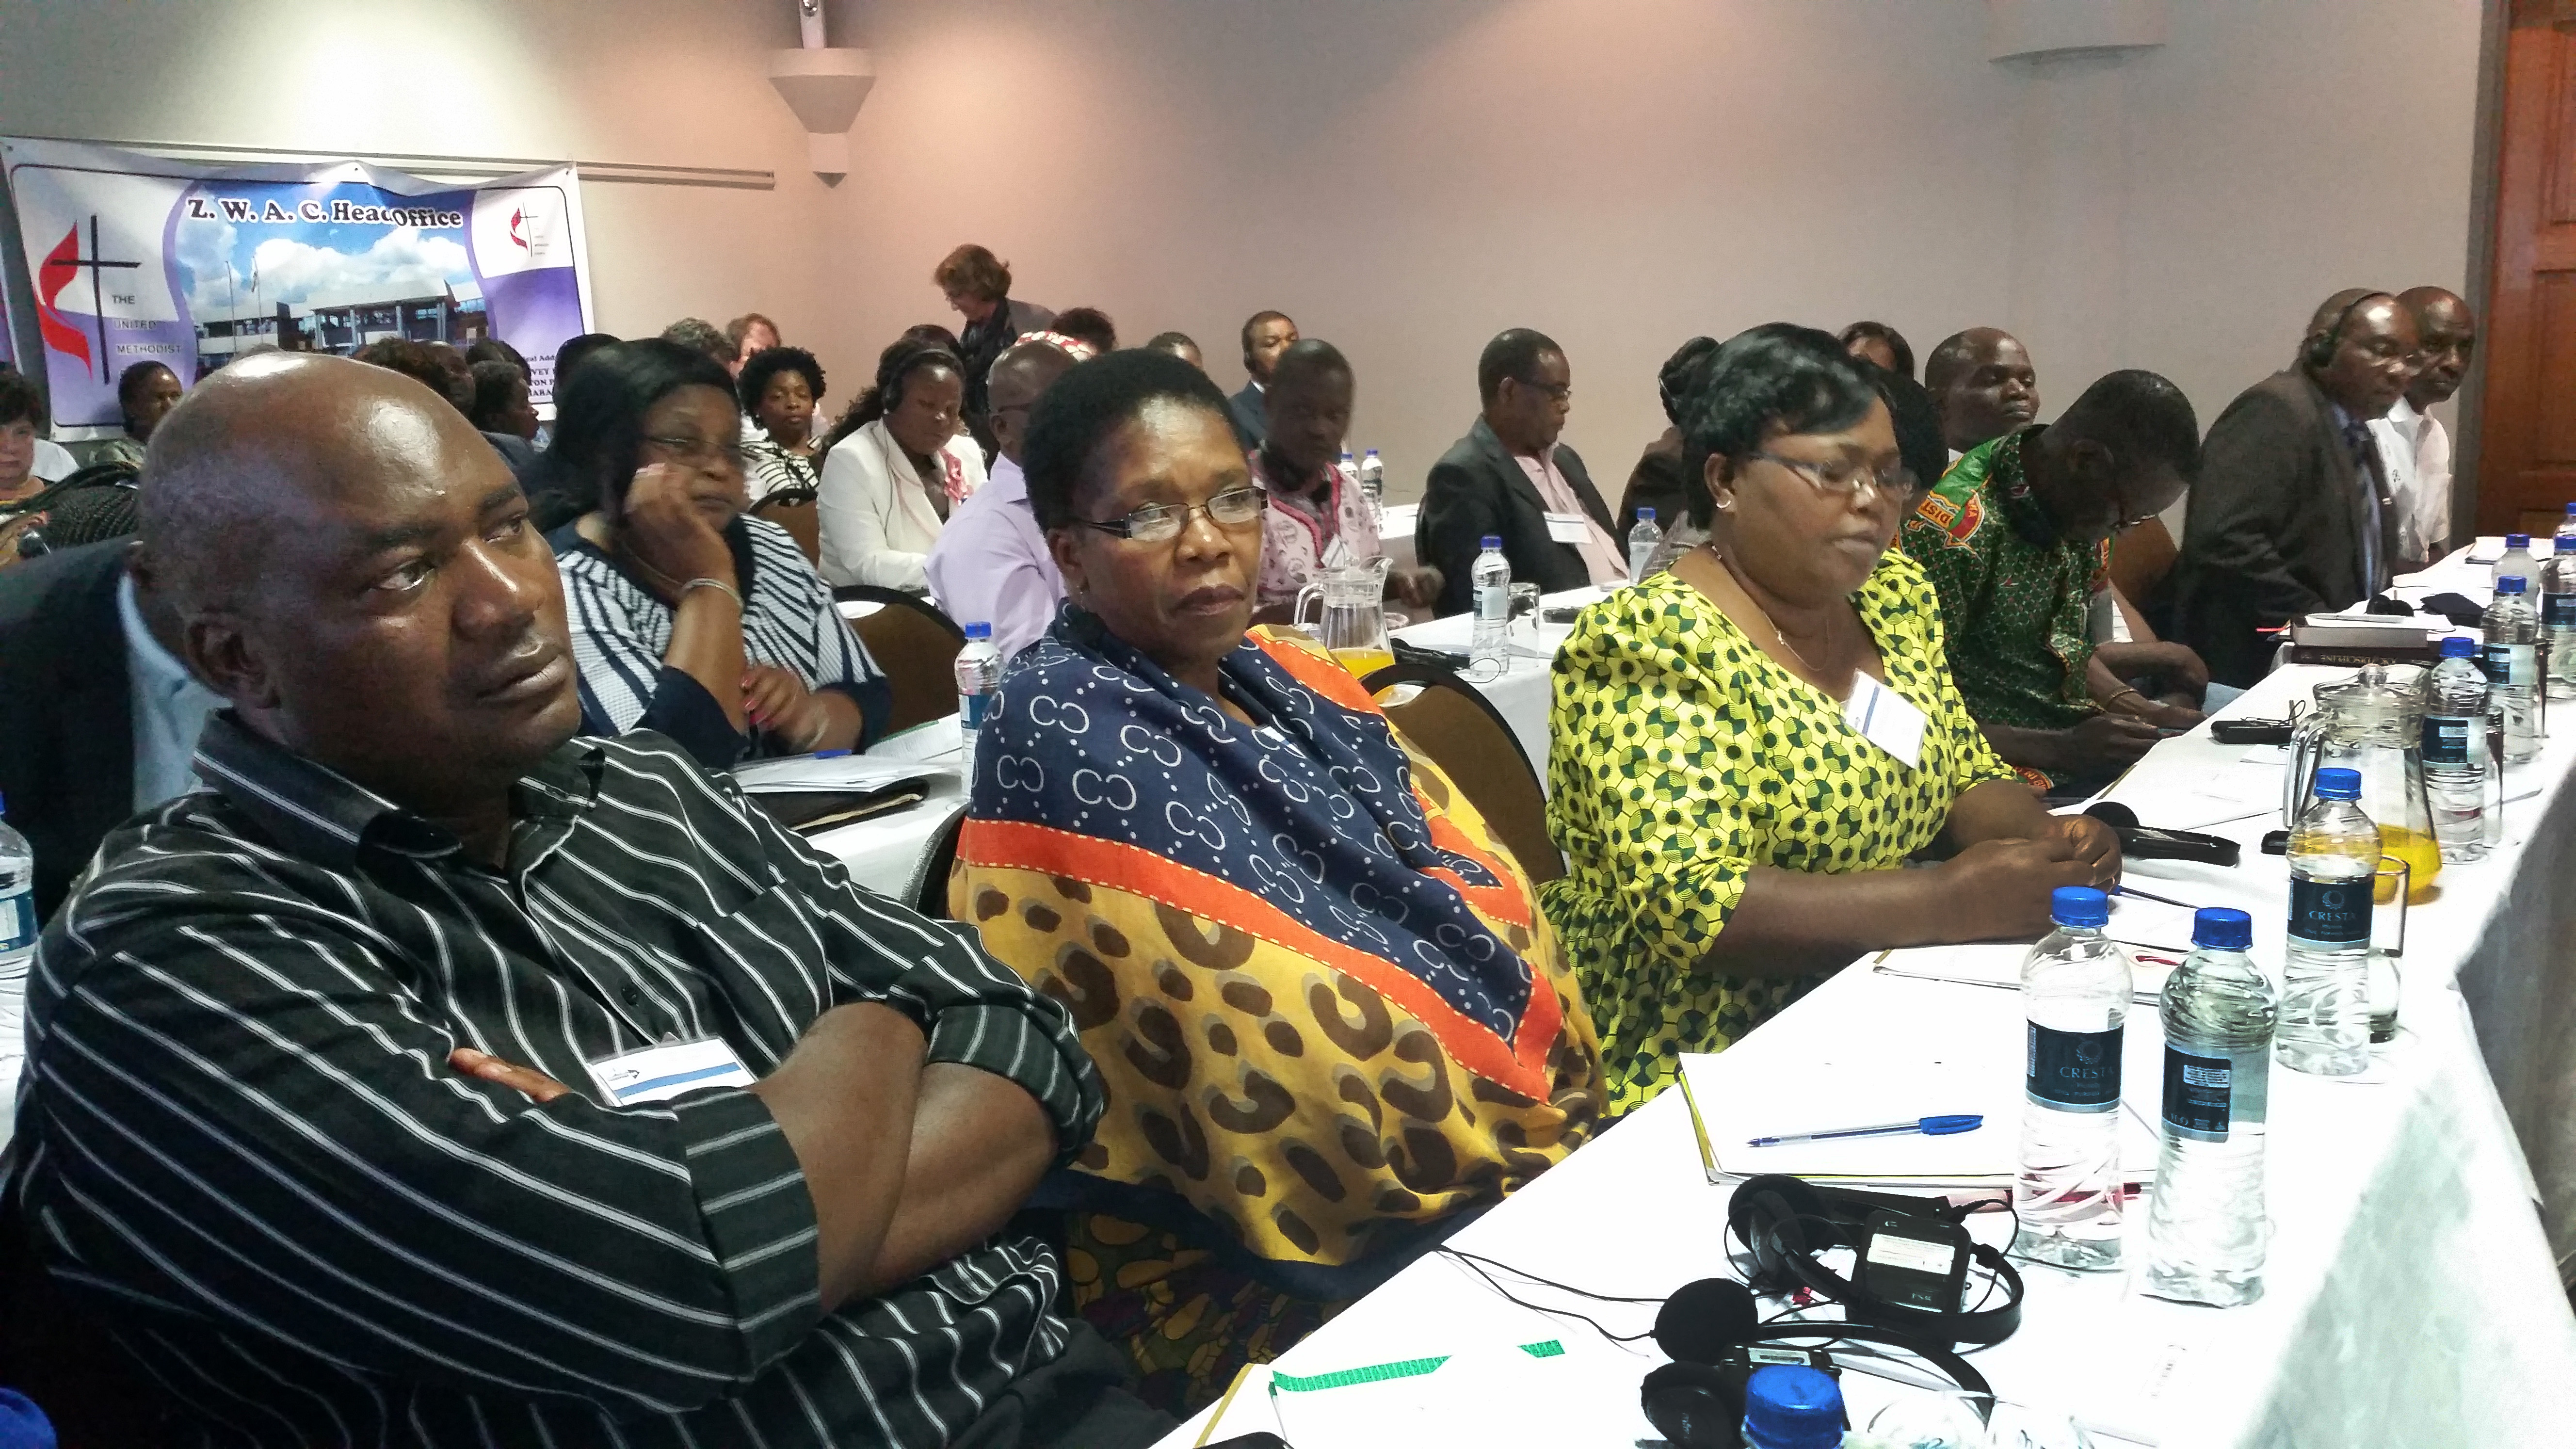 The Rev. Forbes Matonga, Betty Katiyo and the Rev. Annie Grace Chingonzo participate in the 2016 pre-General Conference orientation for Africa Central Conference heads of delegations. Chingonzo remains chair of the Zimbabwe East Conference delegation and says it favors the Traditional Plan, one of the main legislative options to be considered at the 2019 special called session of General Conference. File photo by Eveline Chikwanah, UMNS.